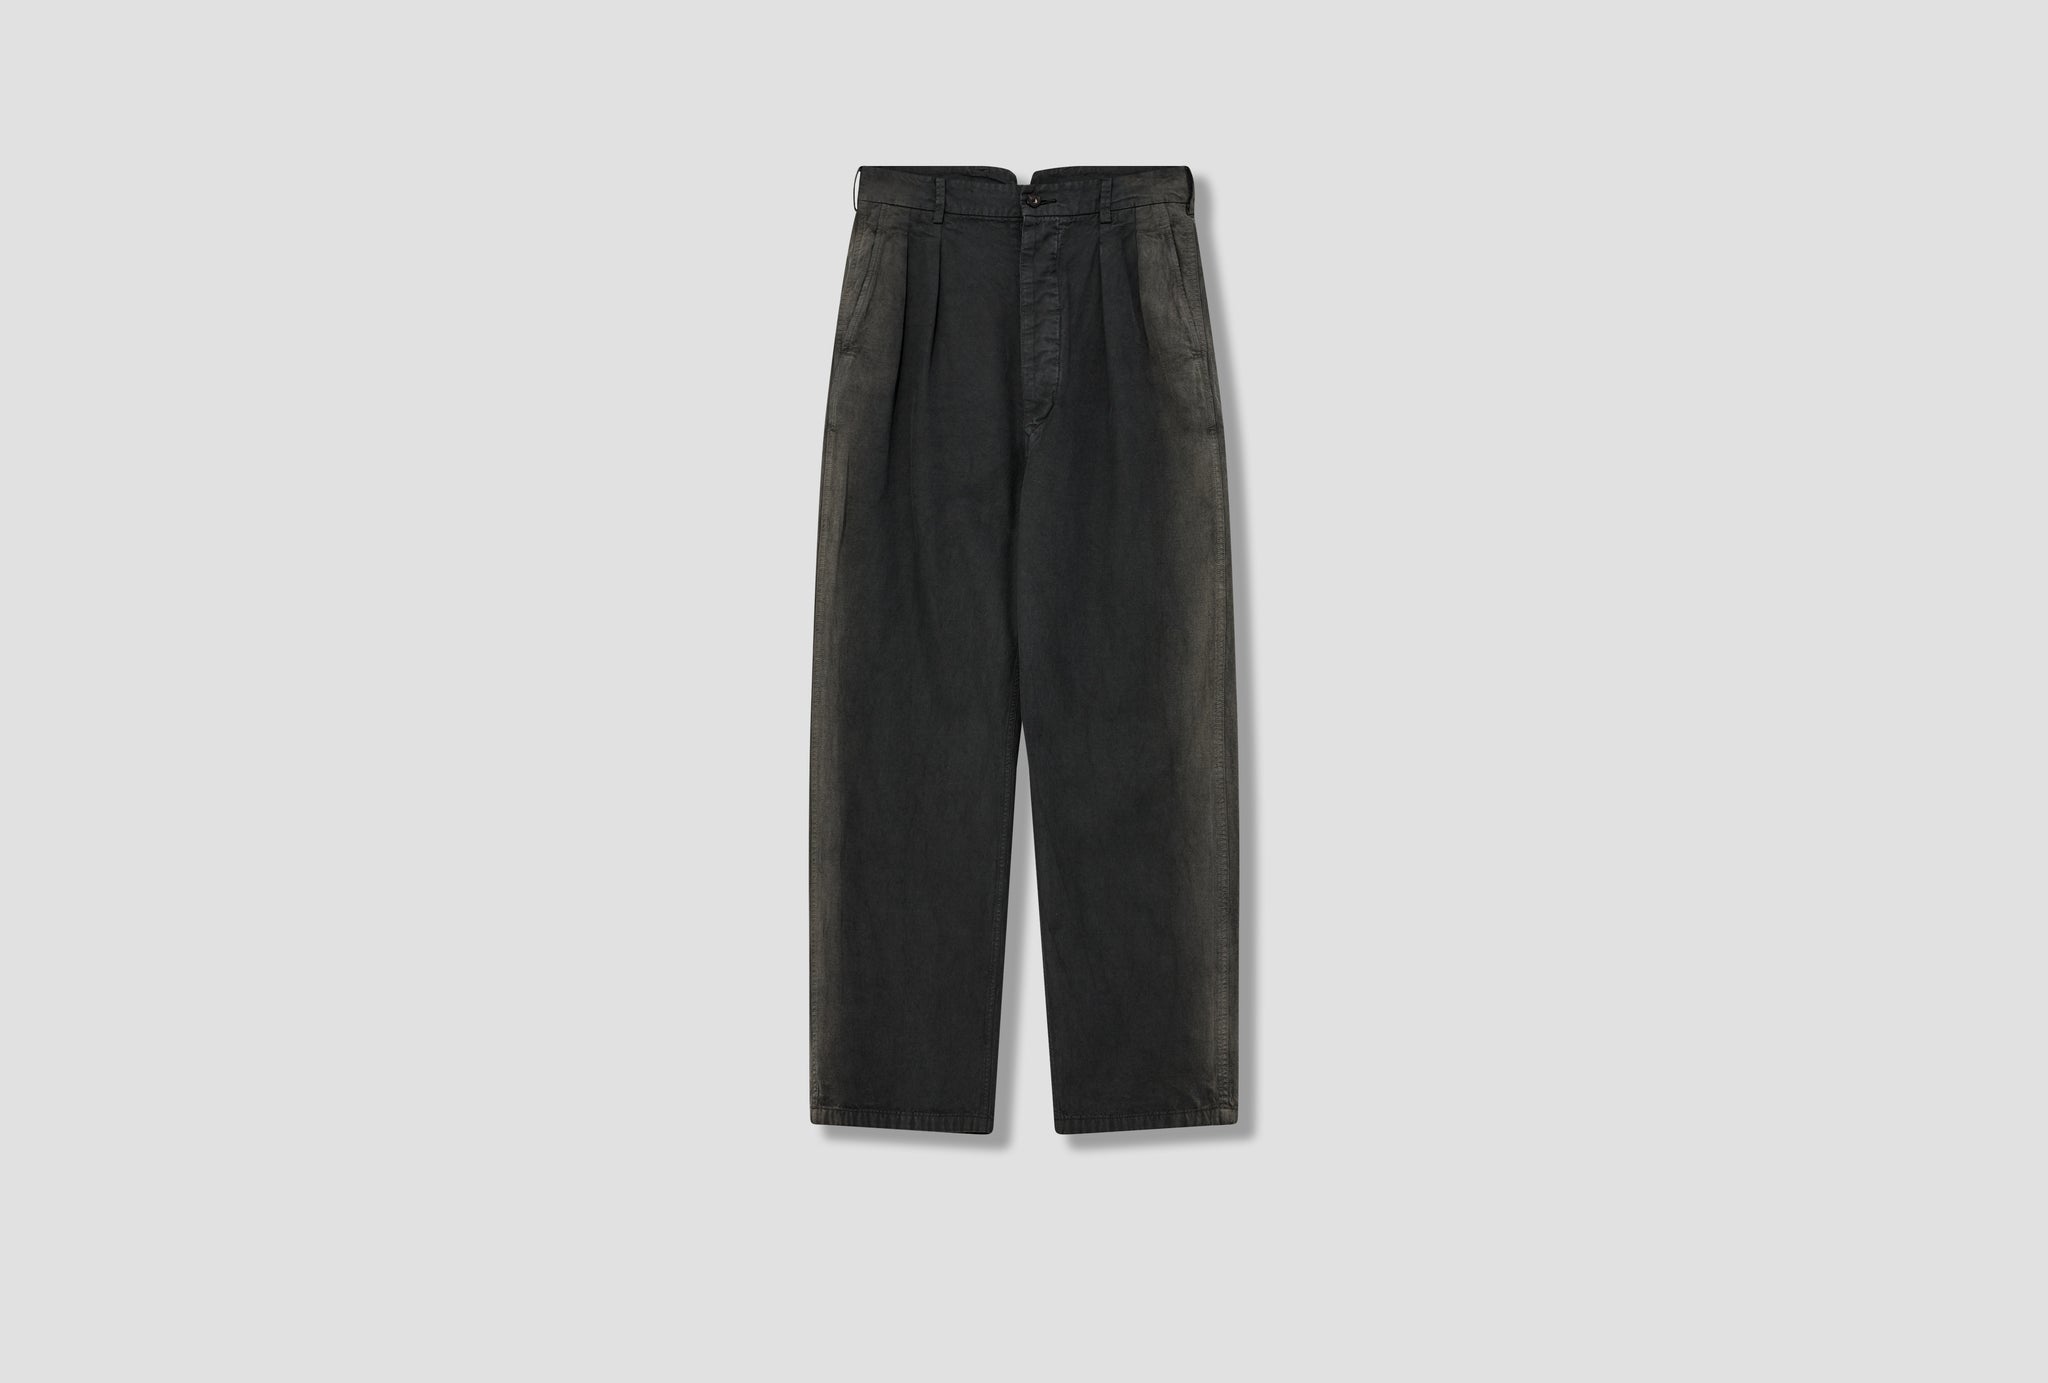 FINX NATURAL GABARDINE PRODUCT DYED PANTS A23SP02AT Black